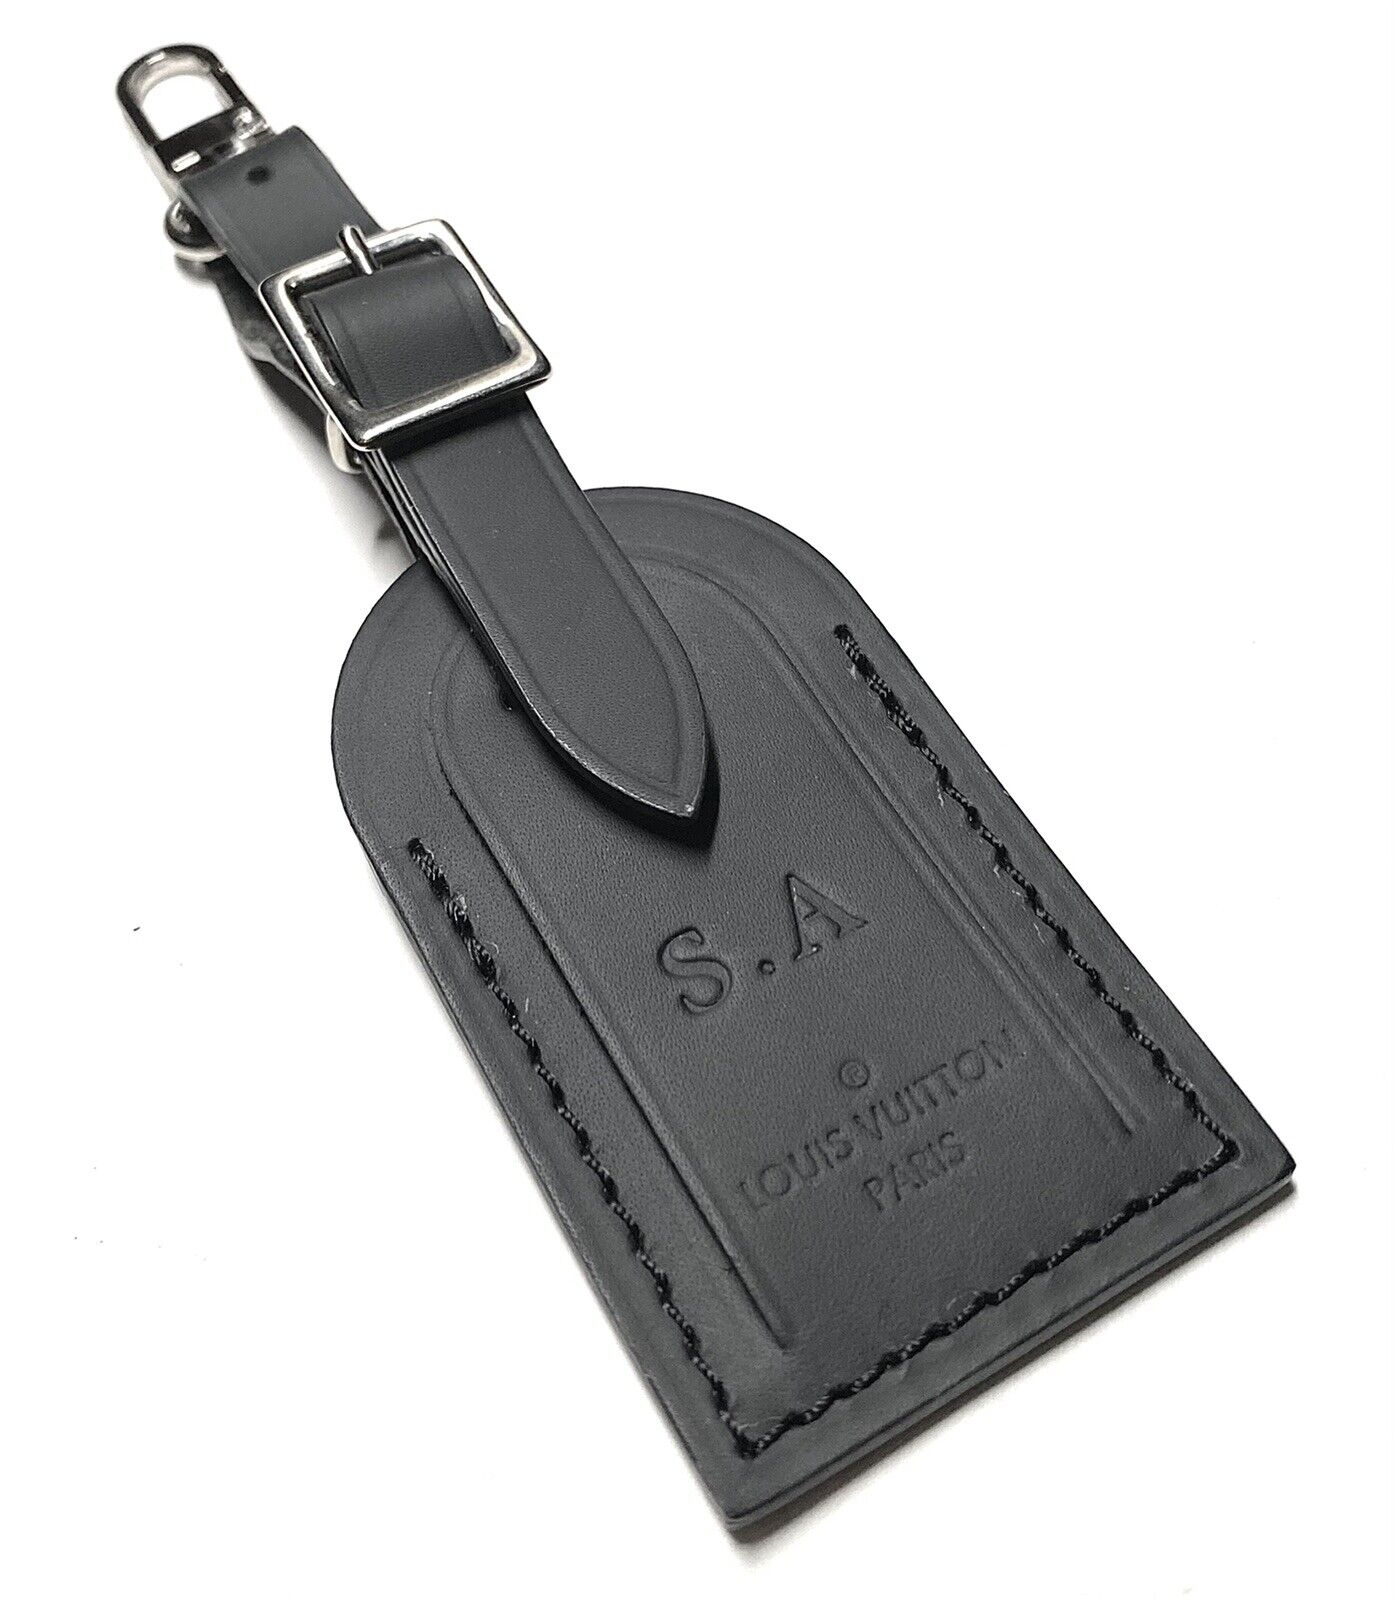 Louis Vuitton Name Tag w/ IS Initials Black Leather Small